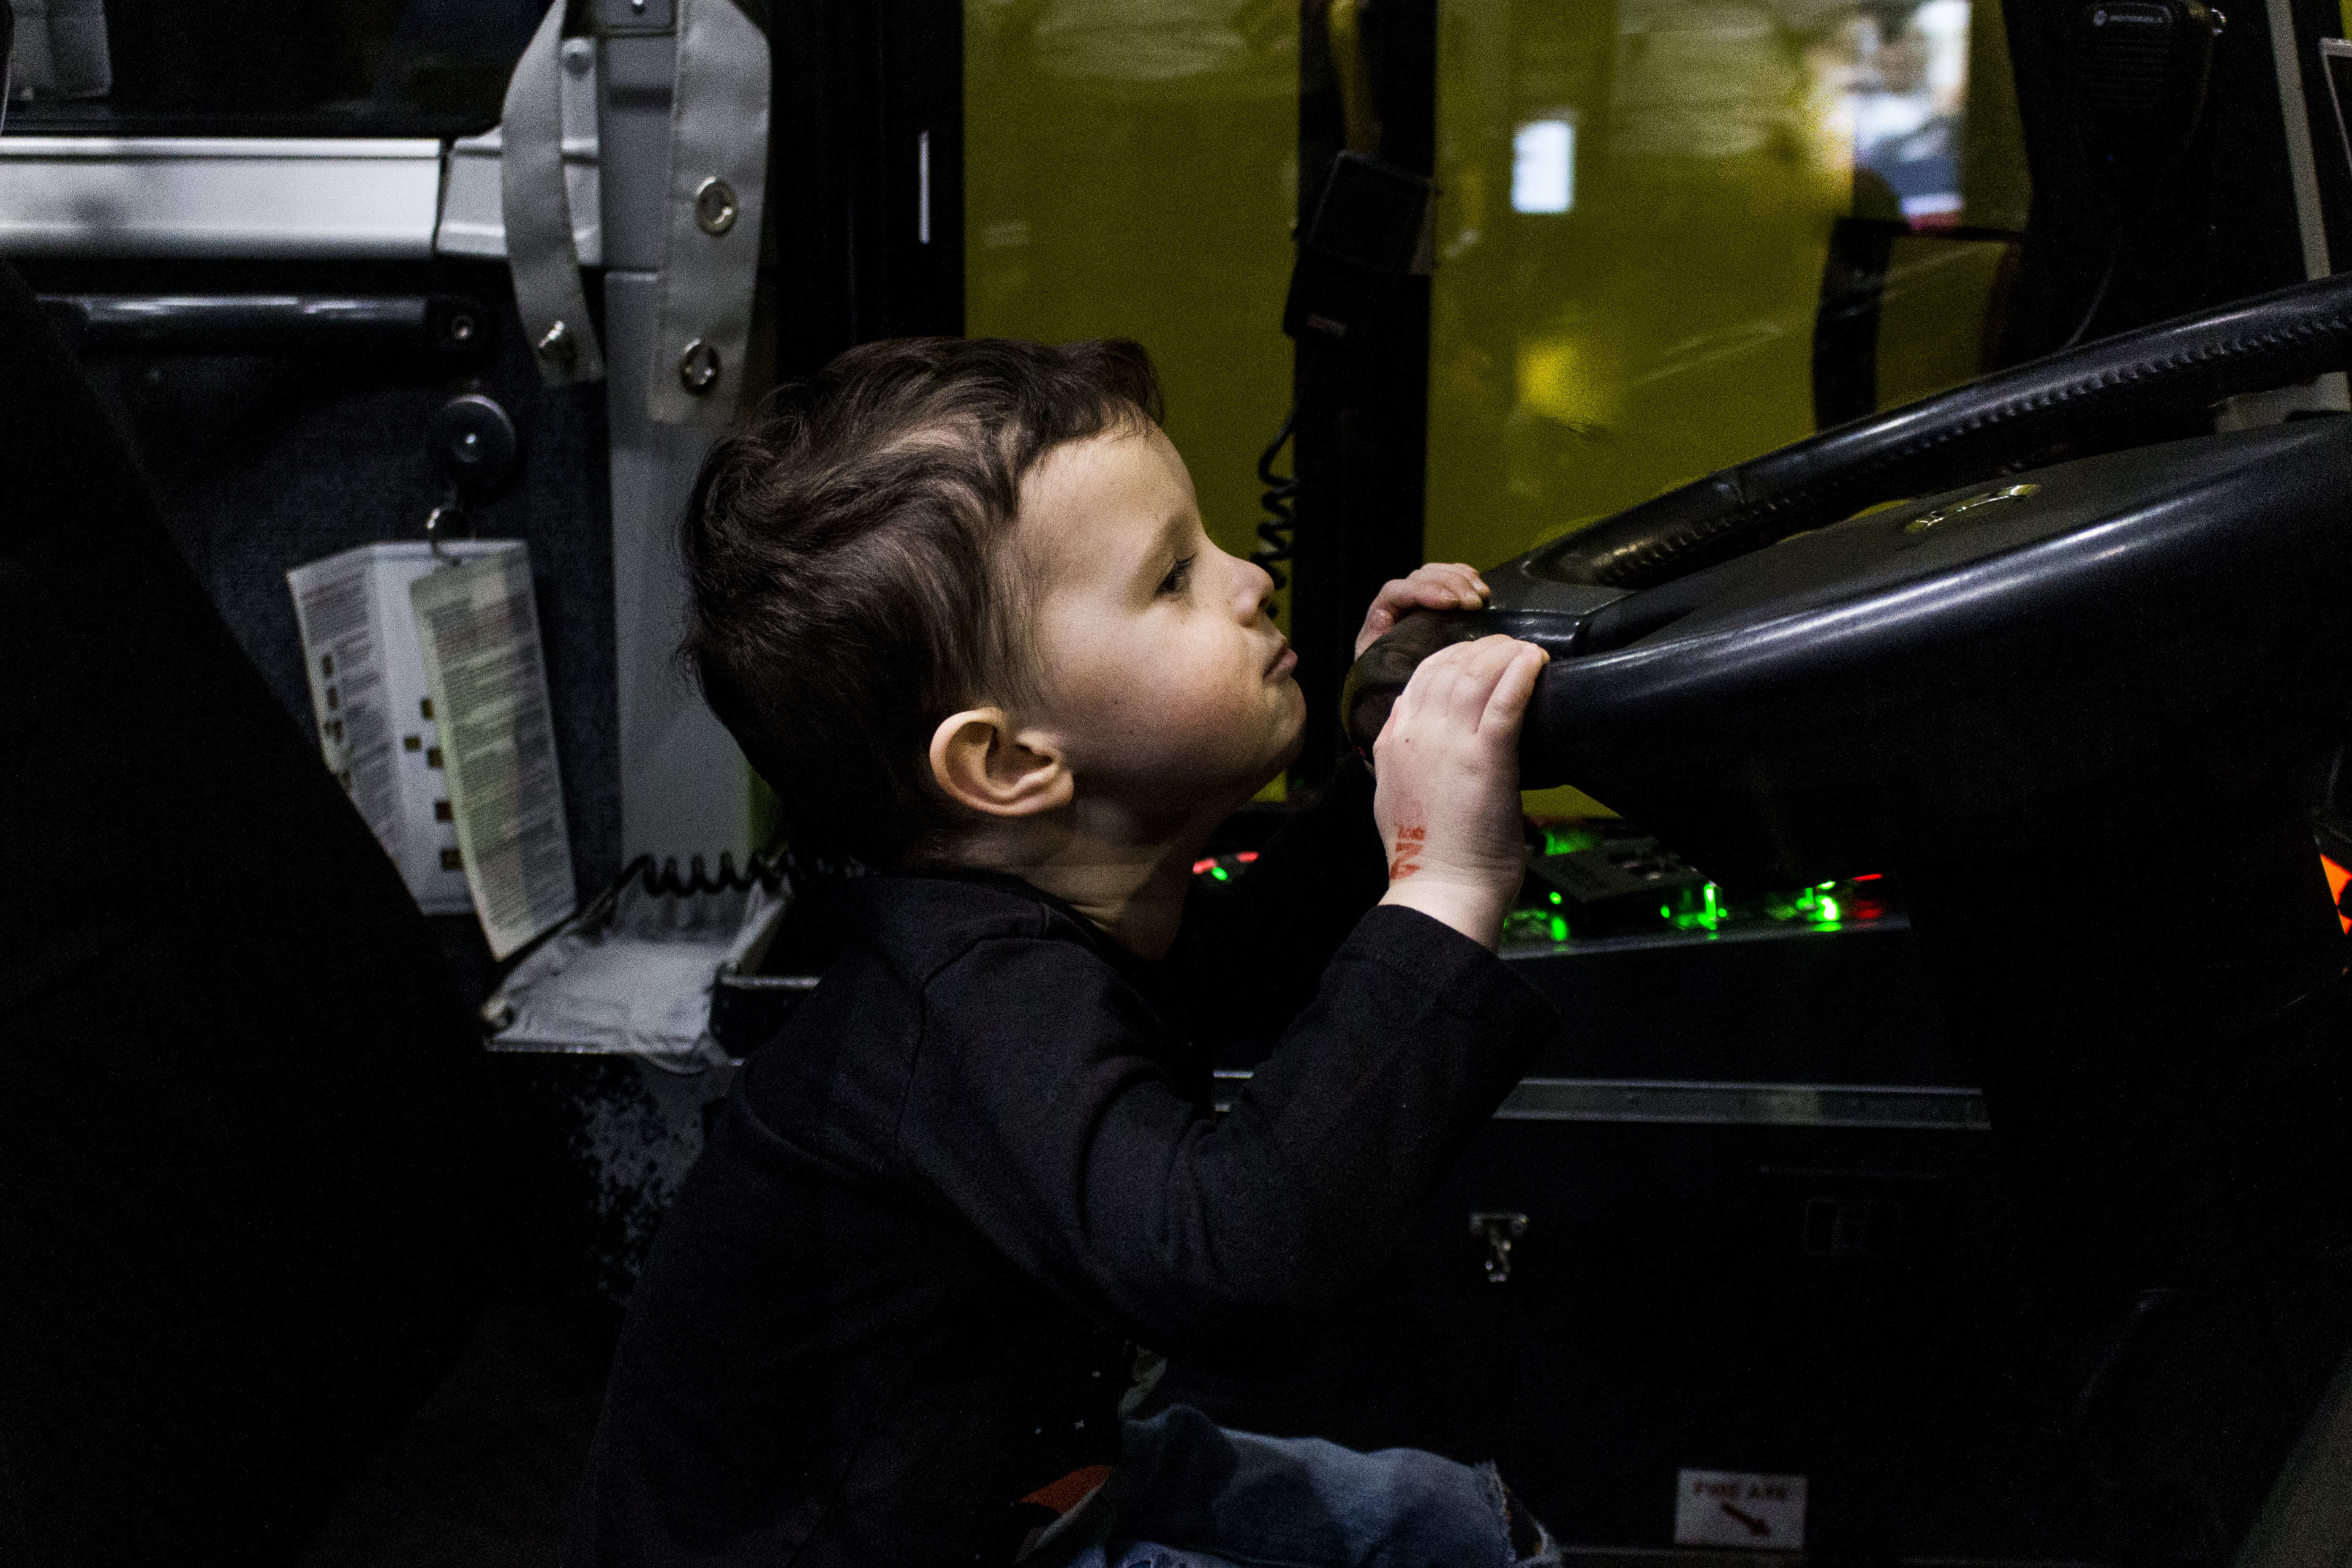 A young boy struggles to see over the wheel of the GO bus.